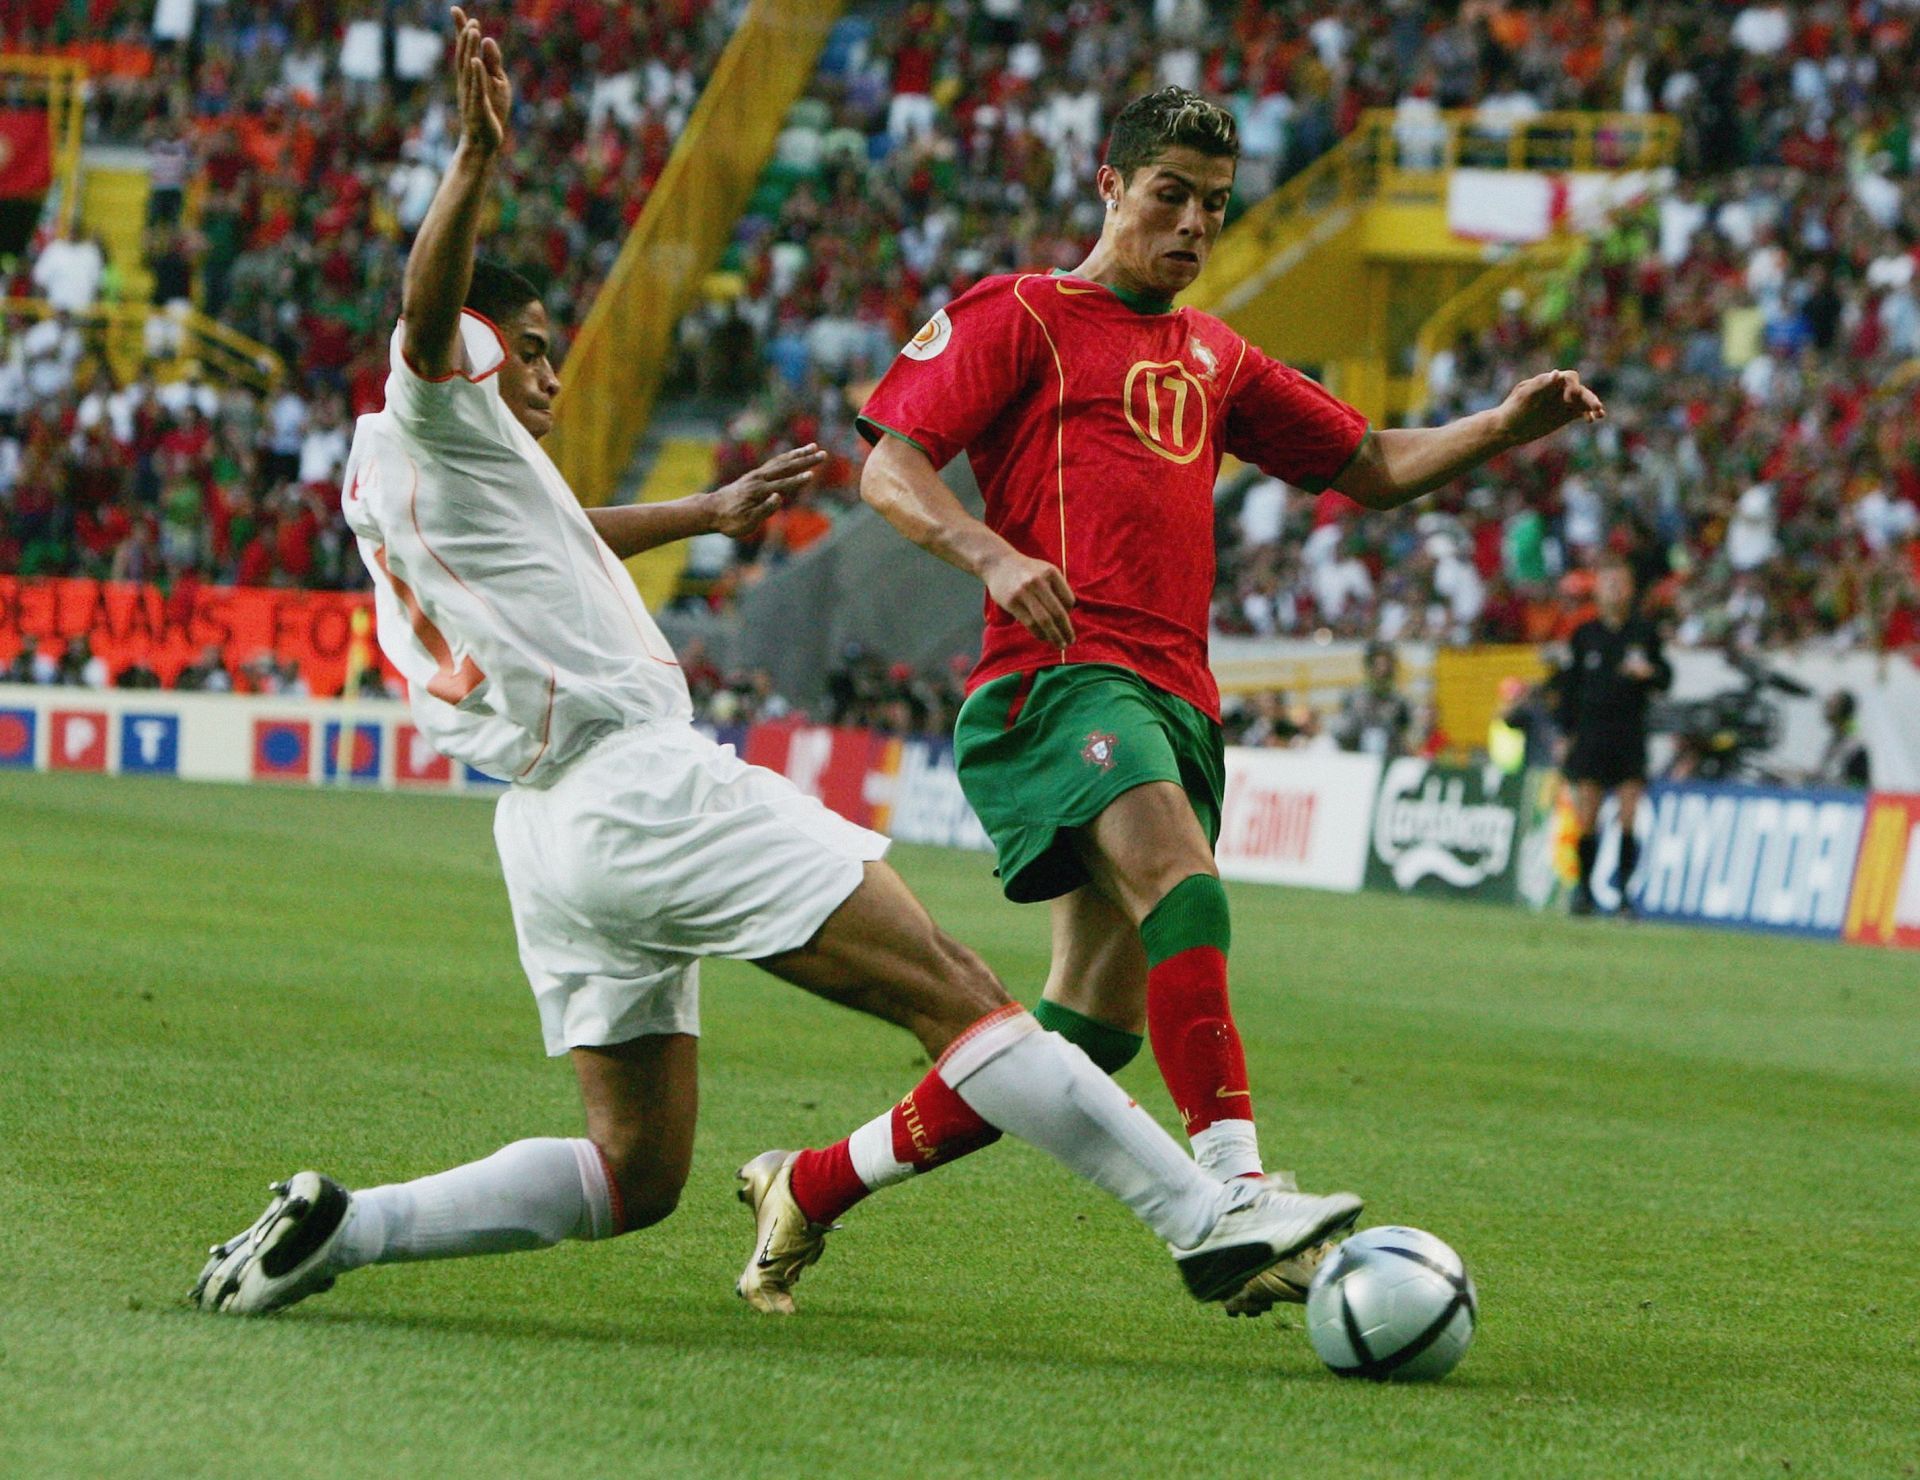 Ronaldo used to wear No.17 in his initial days with Portugal